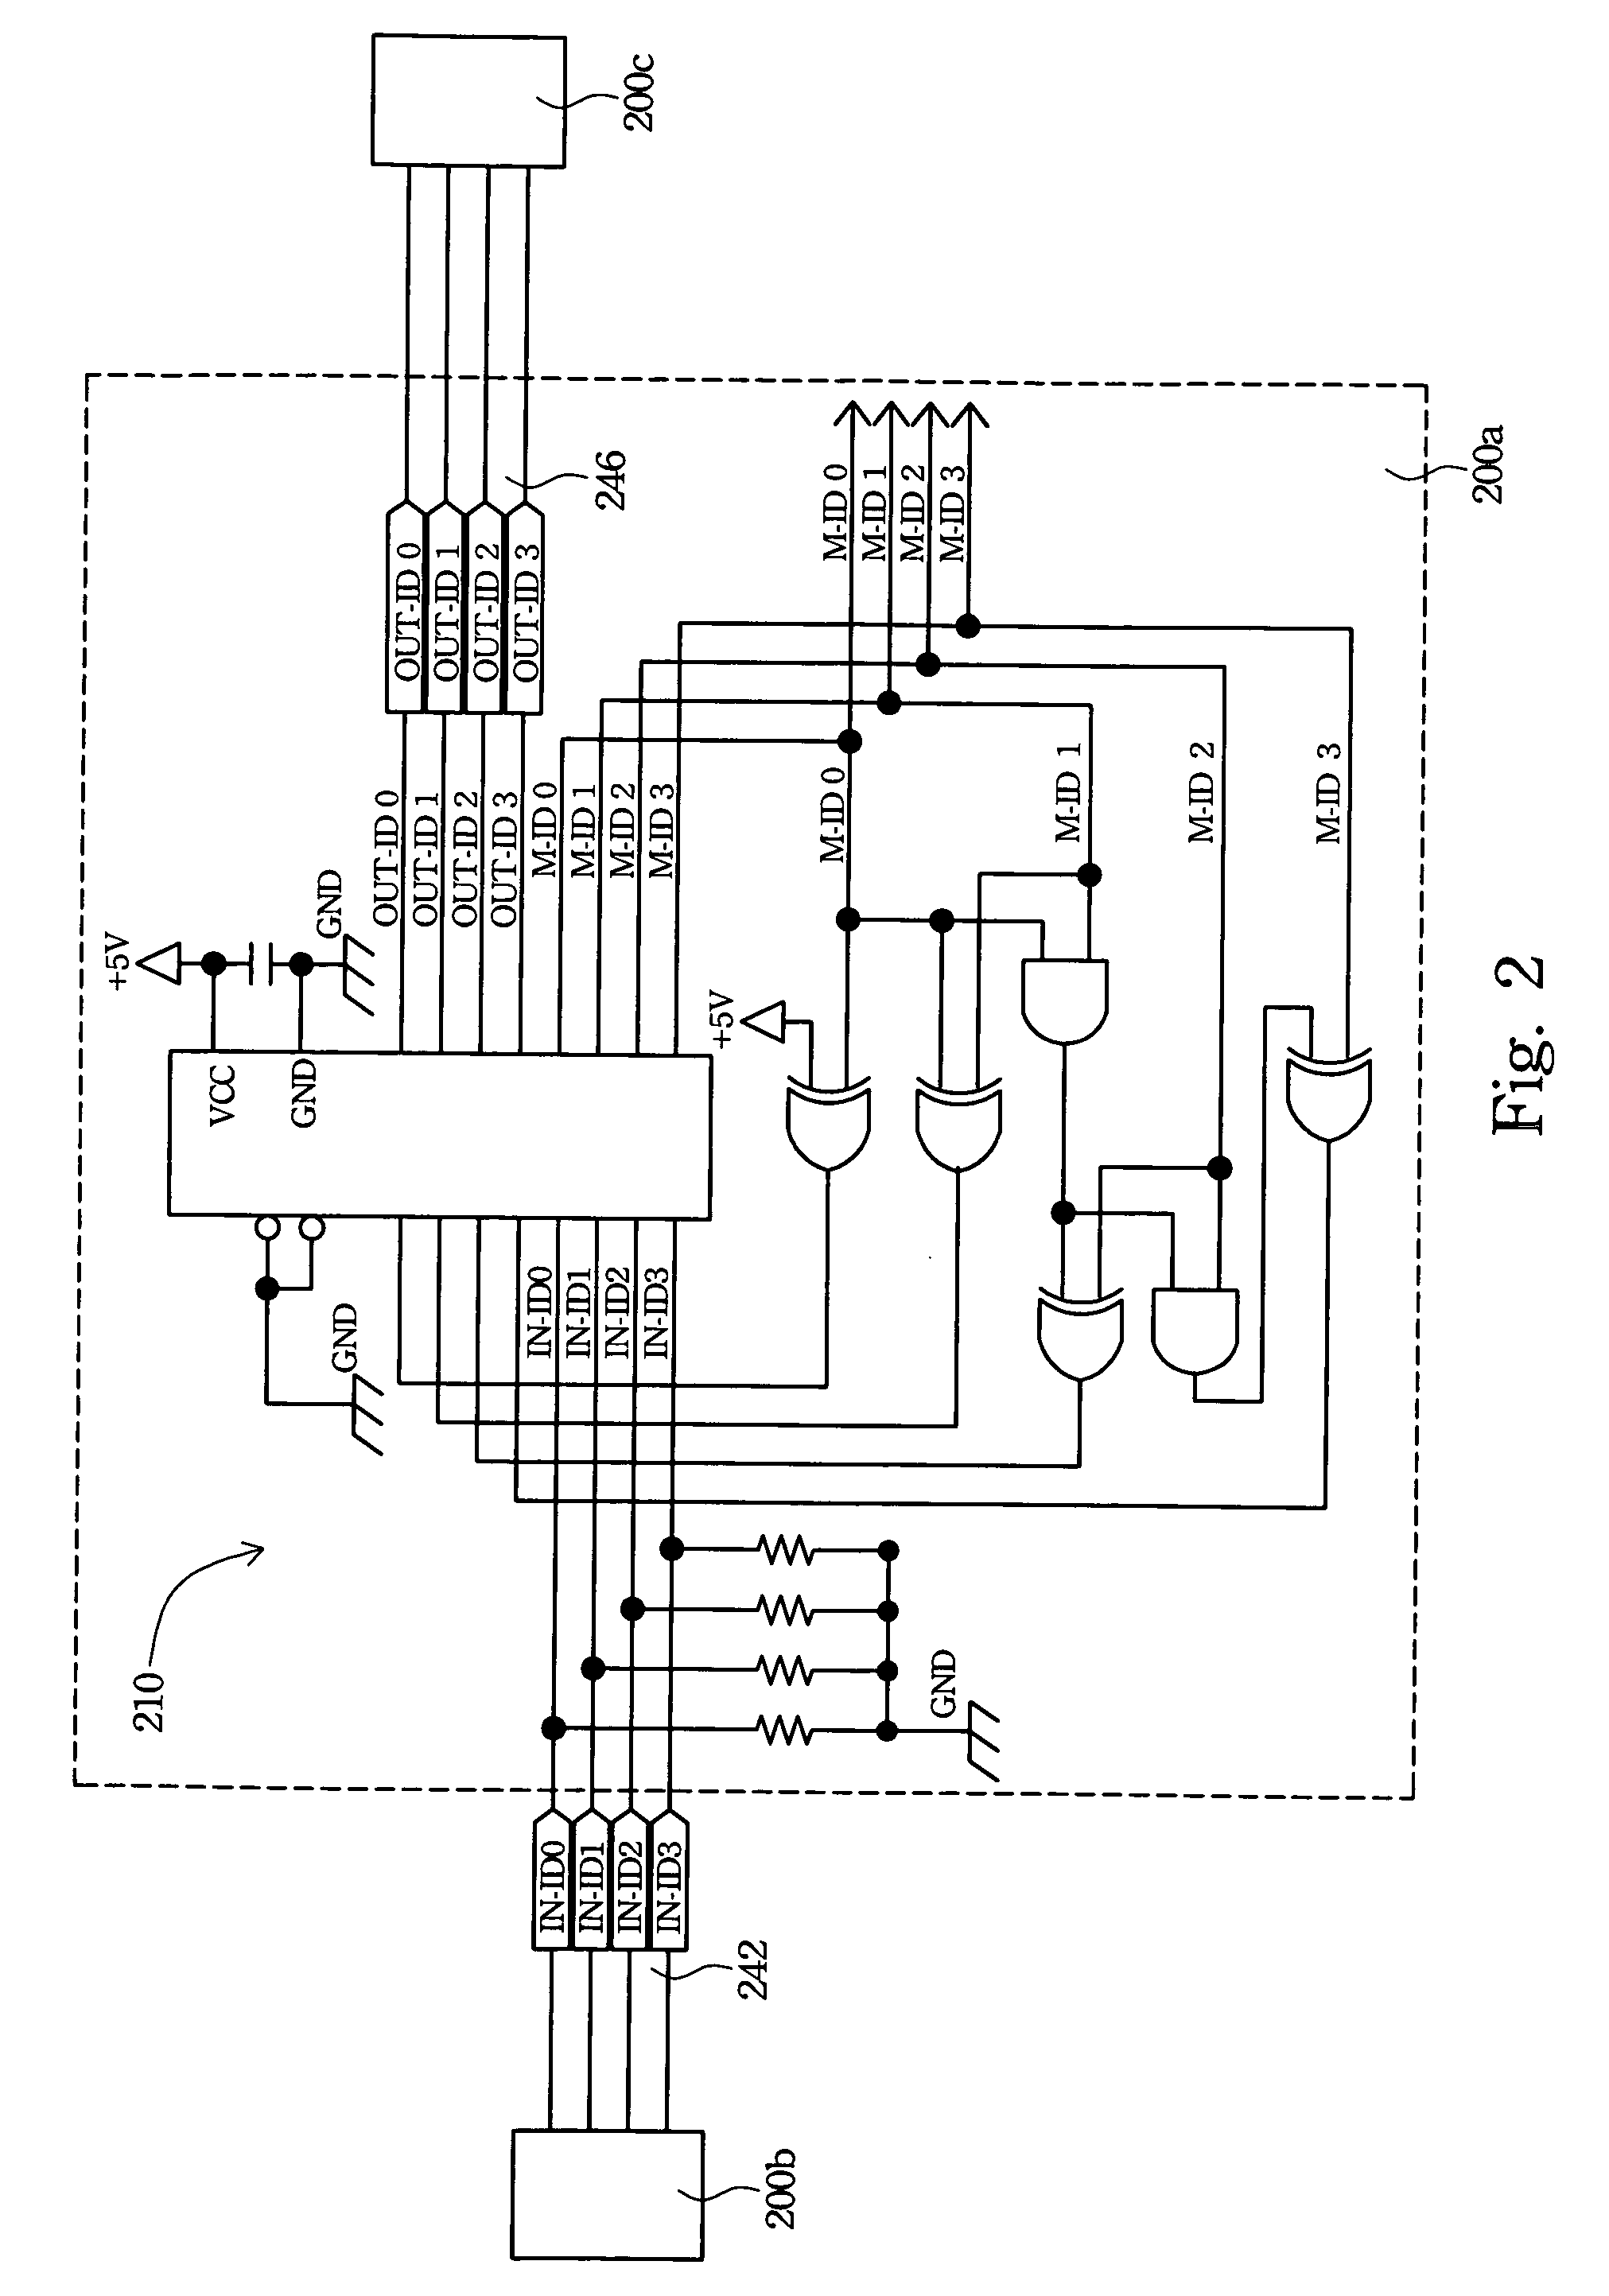 Keyboard video mouse switch for multiple chaining and a method for switching electrical signals thereof